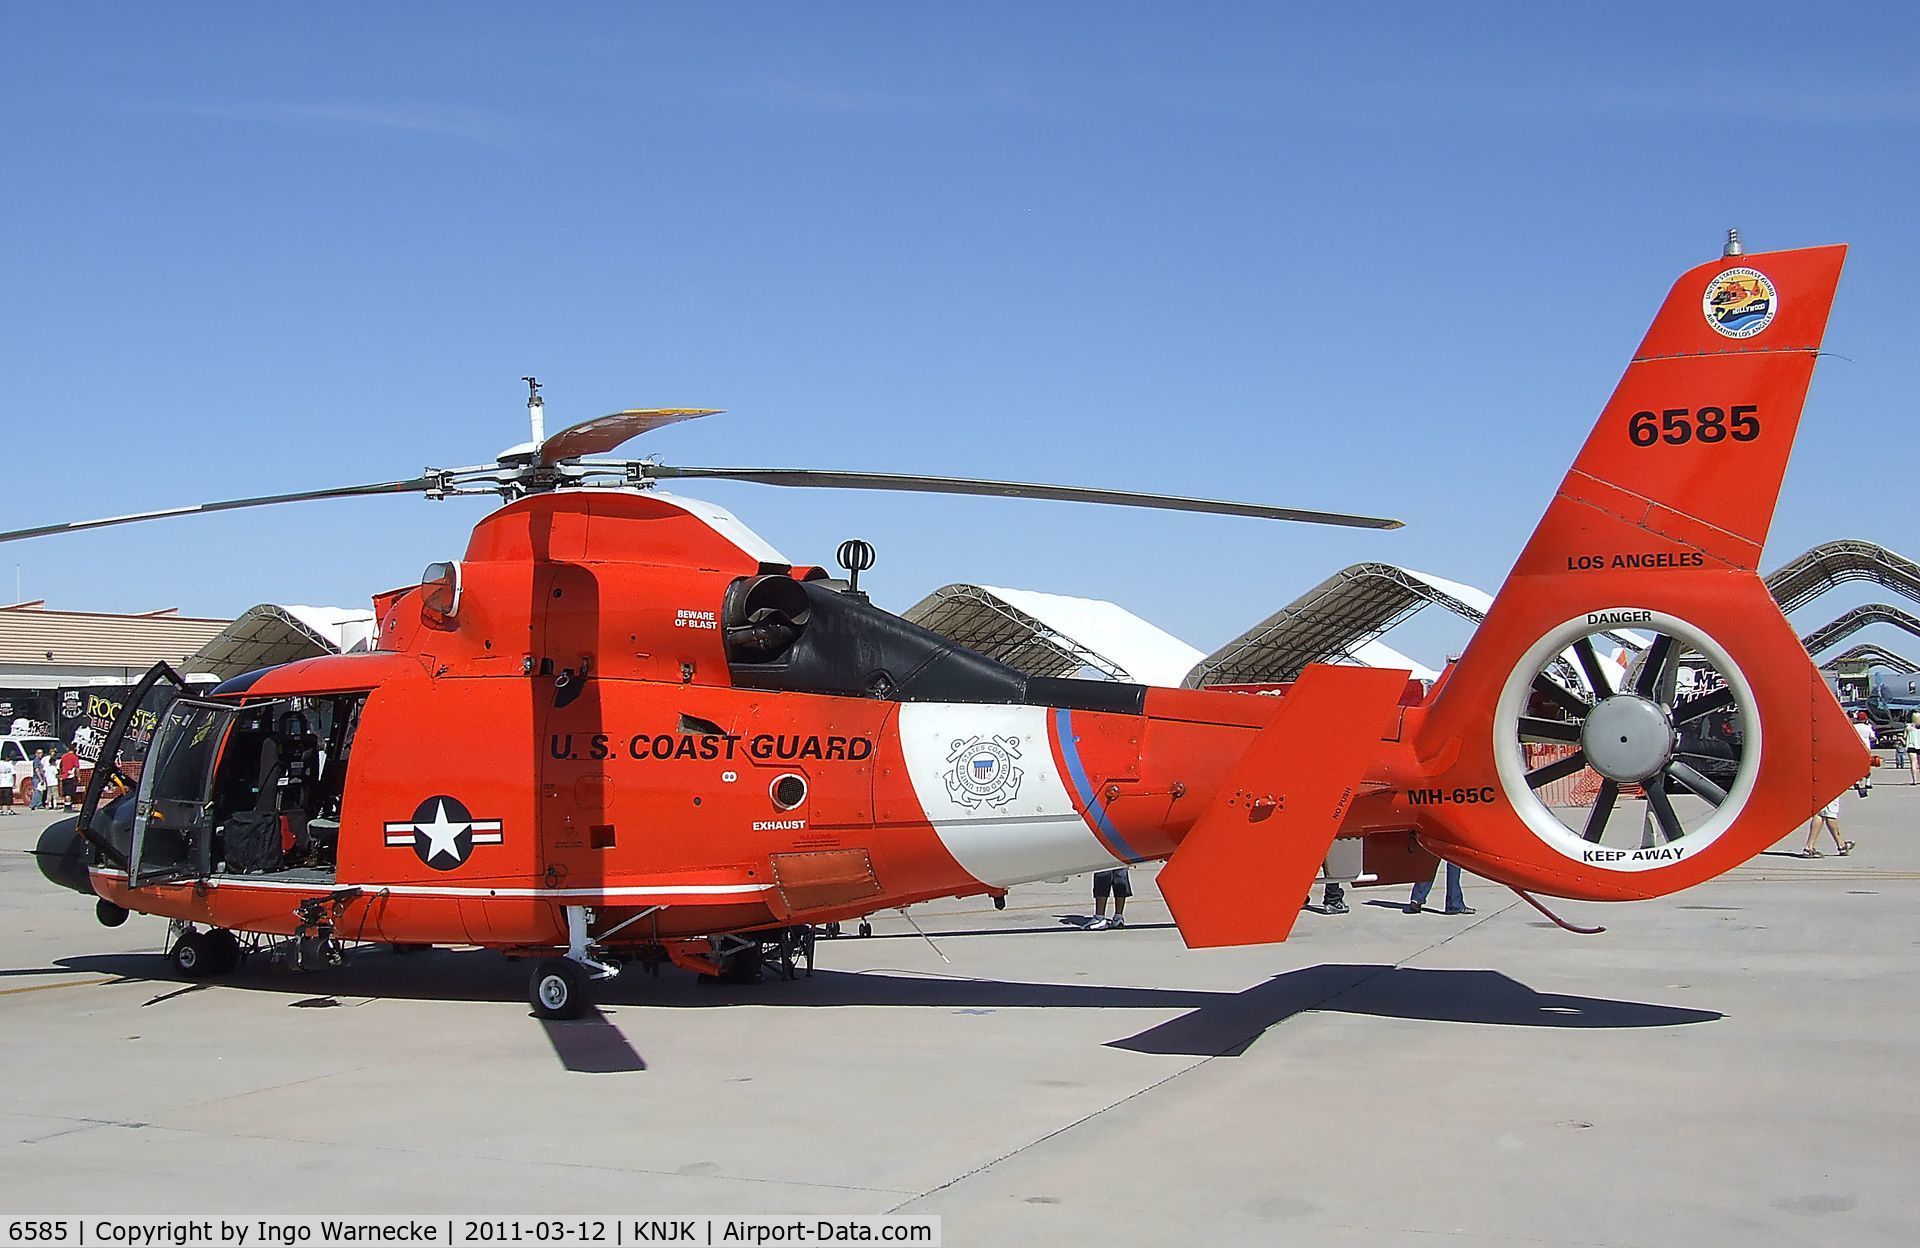 6585, 1988 Aérospatiale HH-65C Dauphin C/N 6284, Aerospatiale HH-65C Dolphin of the USCG at the 2011 airshow at El Centro NAS, CA